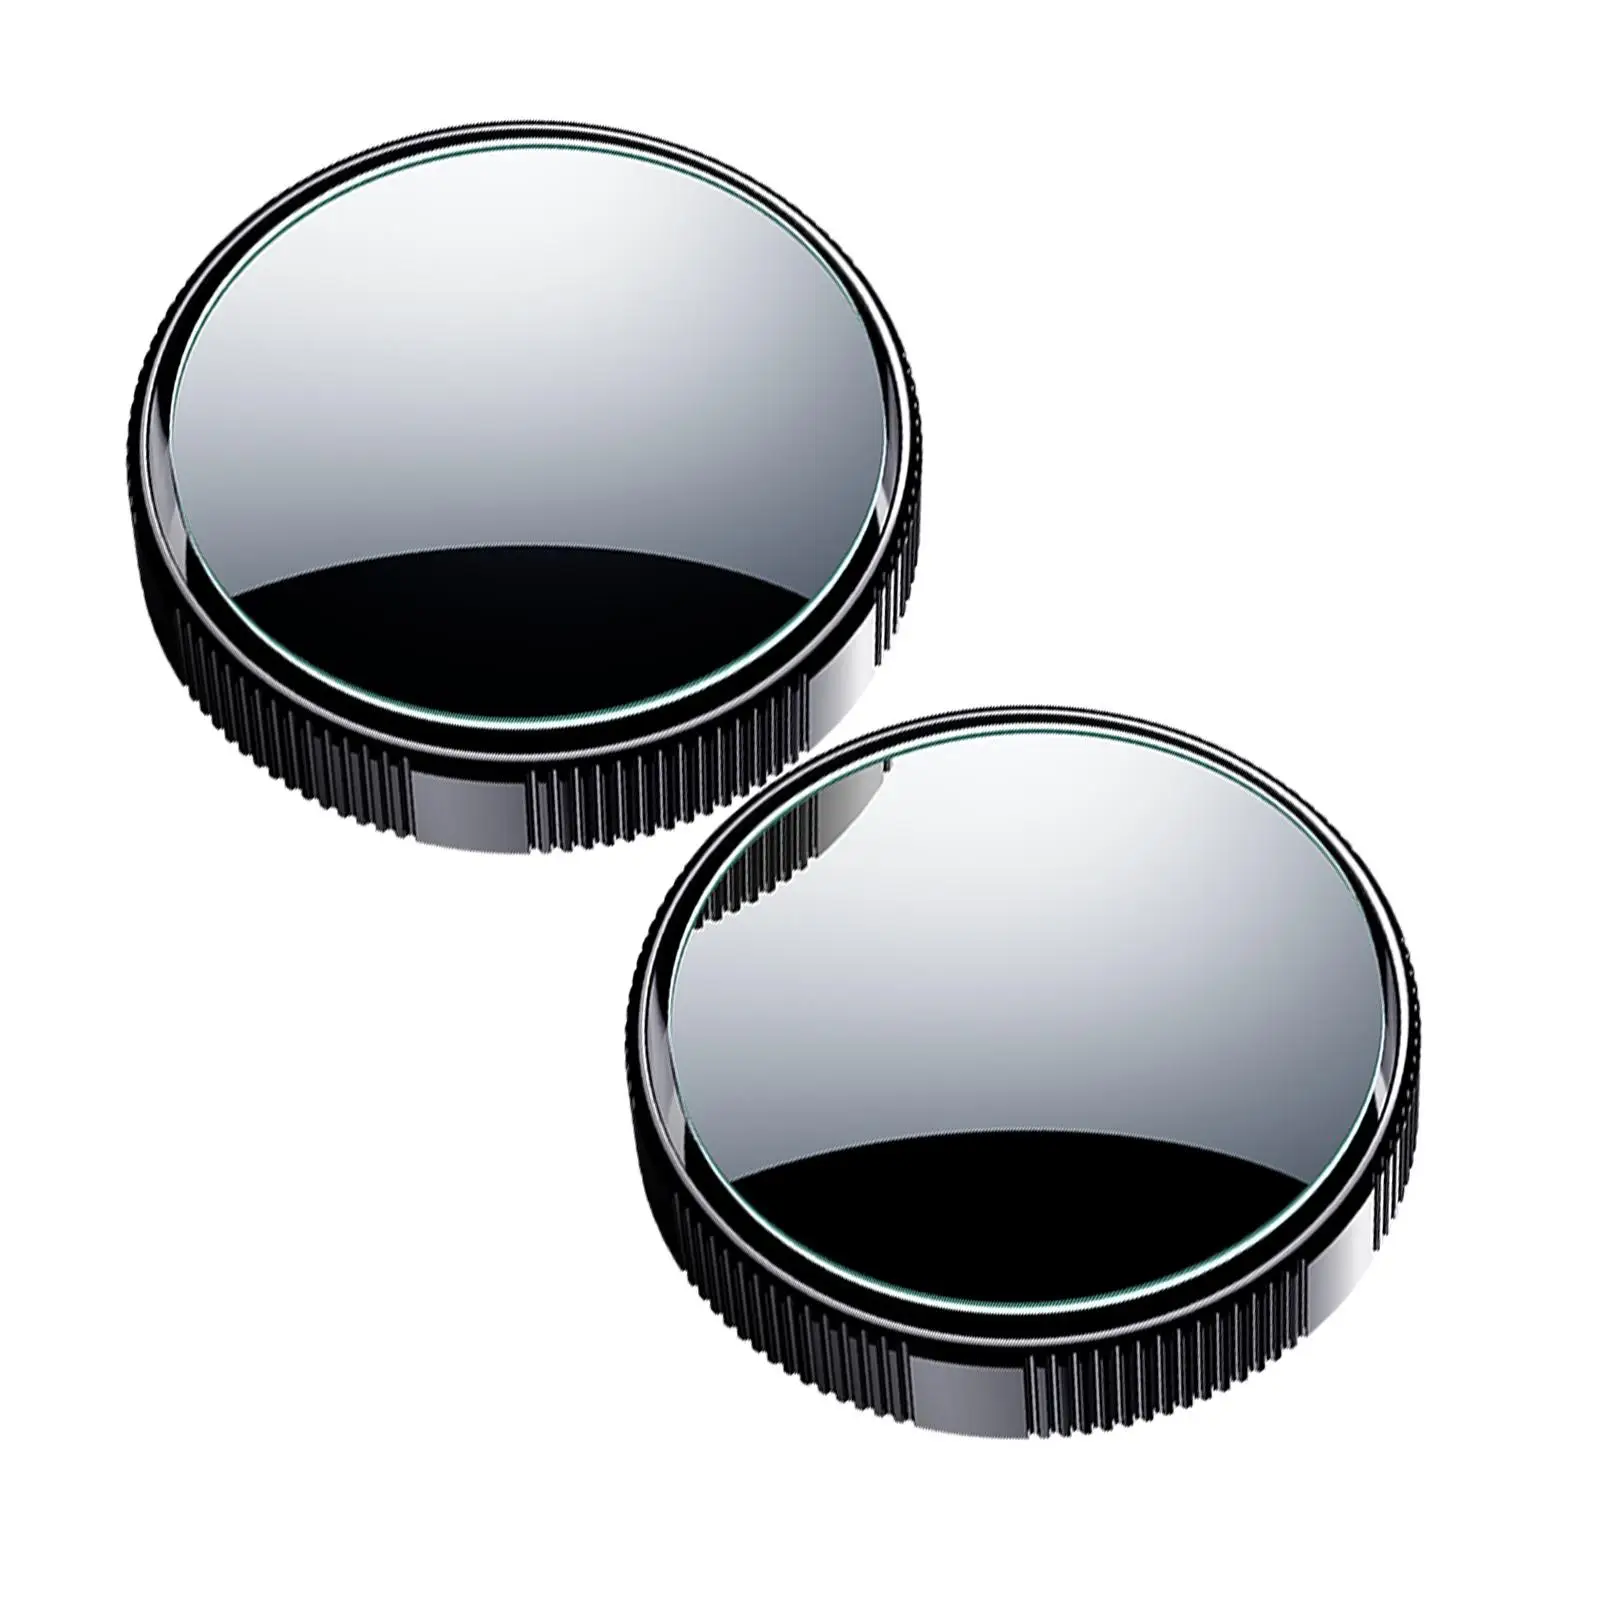 2Pcs Blind Spot Mirrors ABS Housing for Cars Motorcycles Accessories